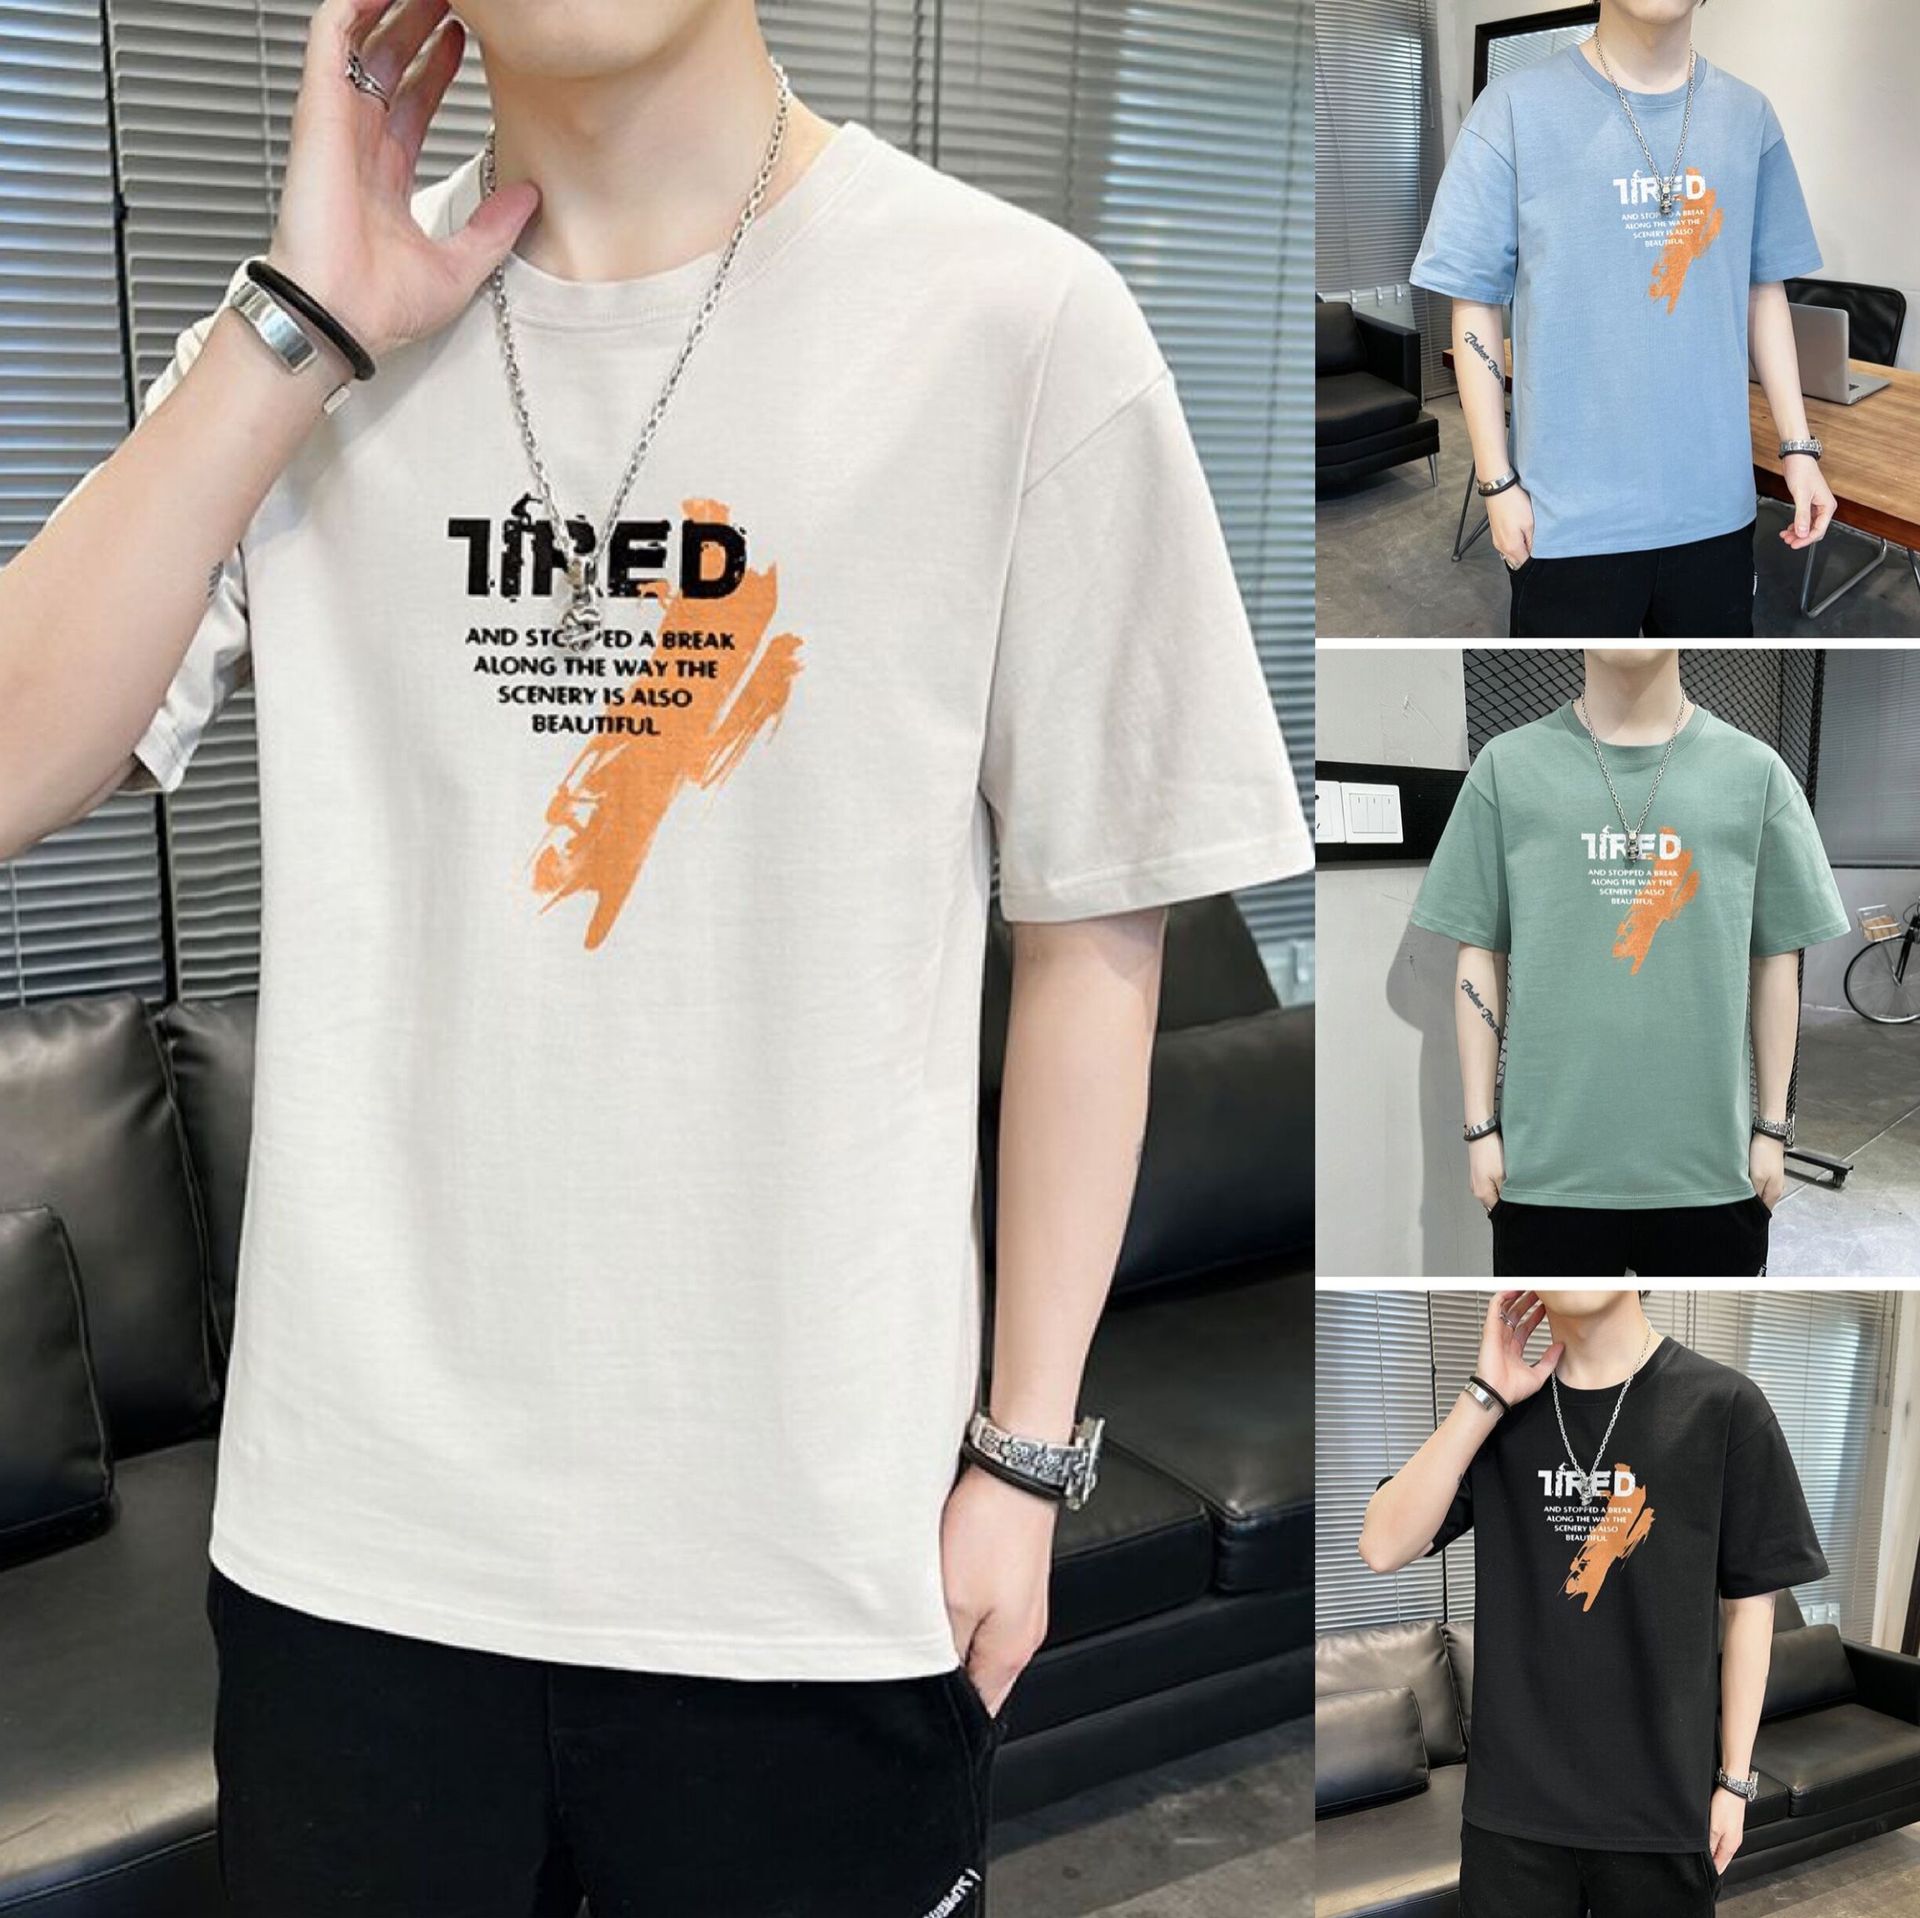 Short-Sleeved T-shirt Men's Cotton Summer New Men's Elbow-Sleeved Top T-shirt Men's Korean Style Fashionable Summer Clothing Fashion Top Clothes